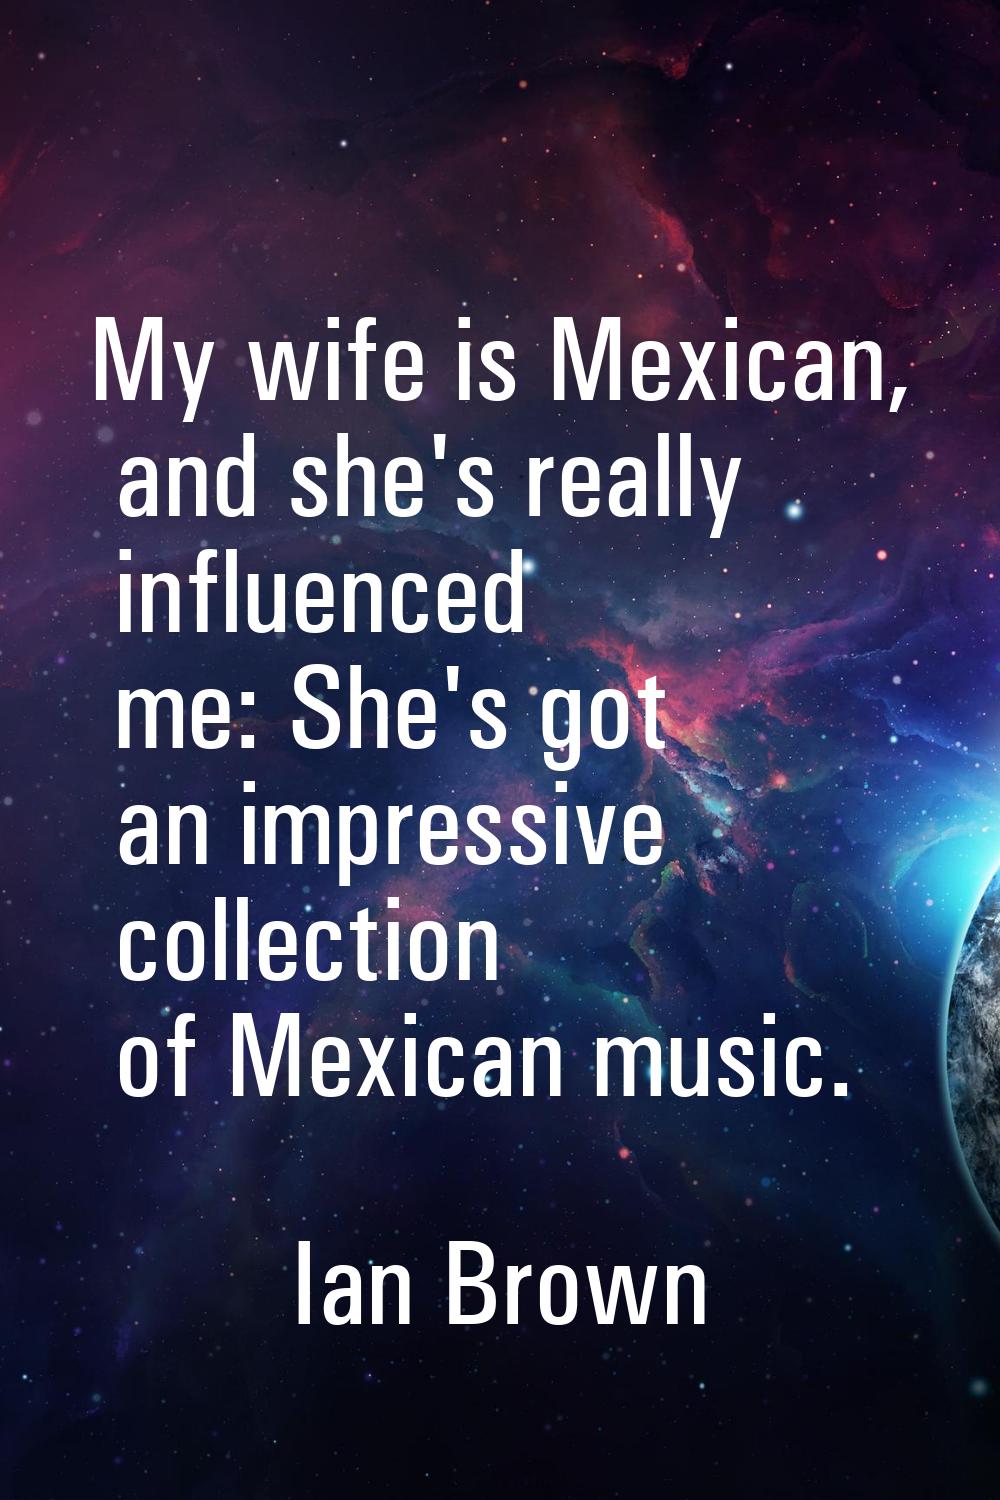 My wife is Mexican, and she's really influenced me: She's got an impressive collection of Mexican m